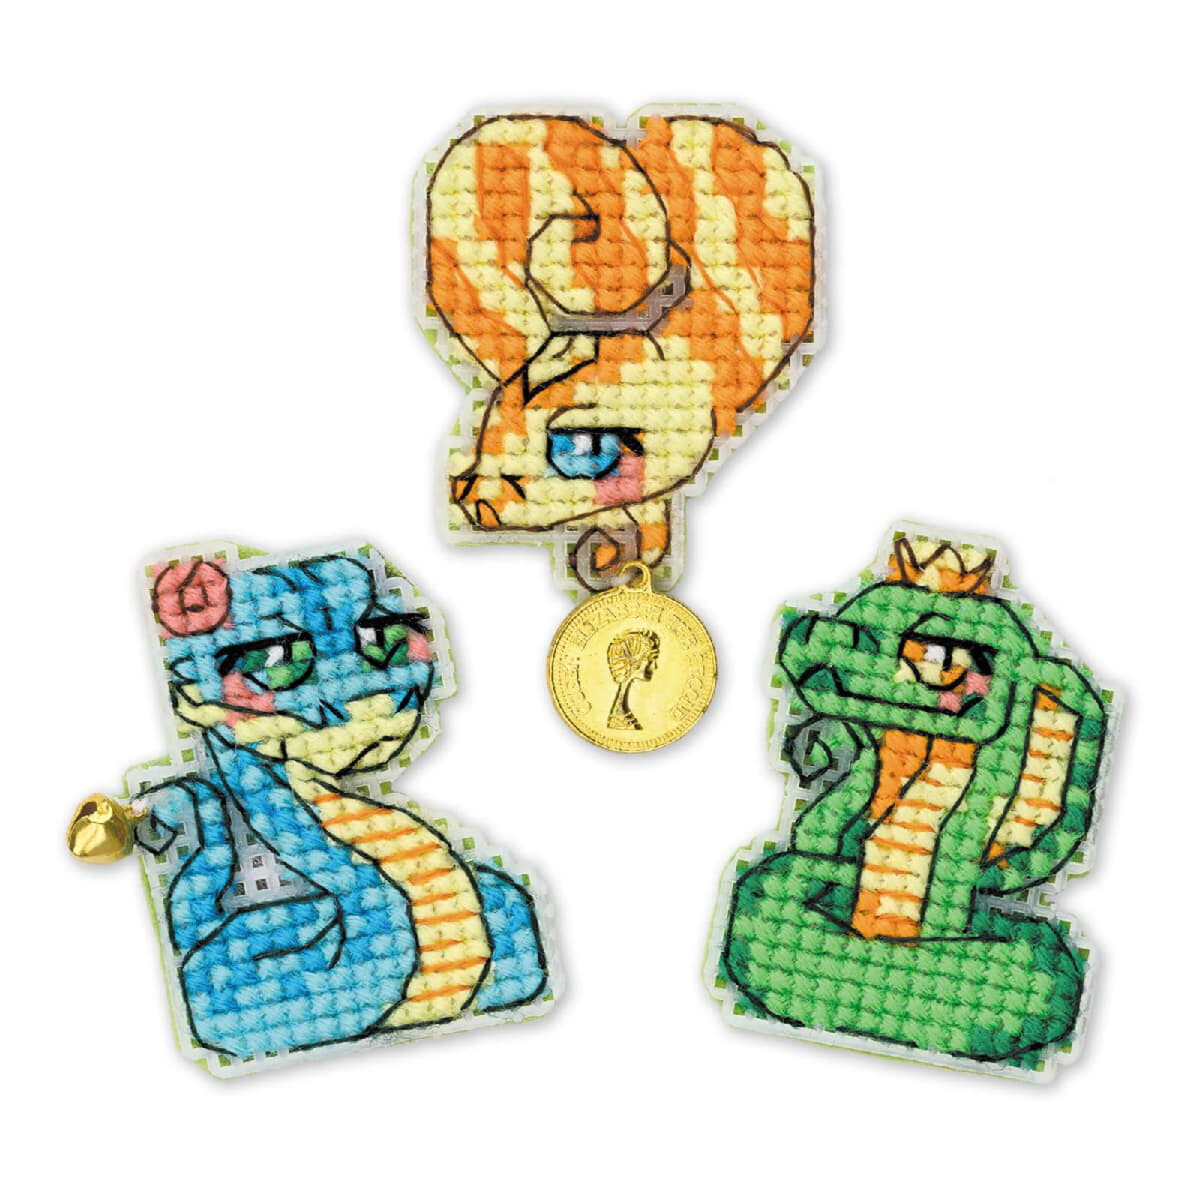 Riolis counted cross stitch kit "Magnets Snakelets...